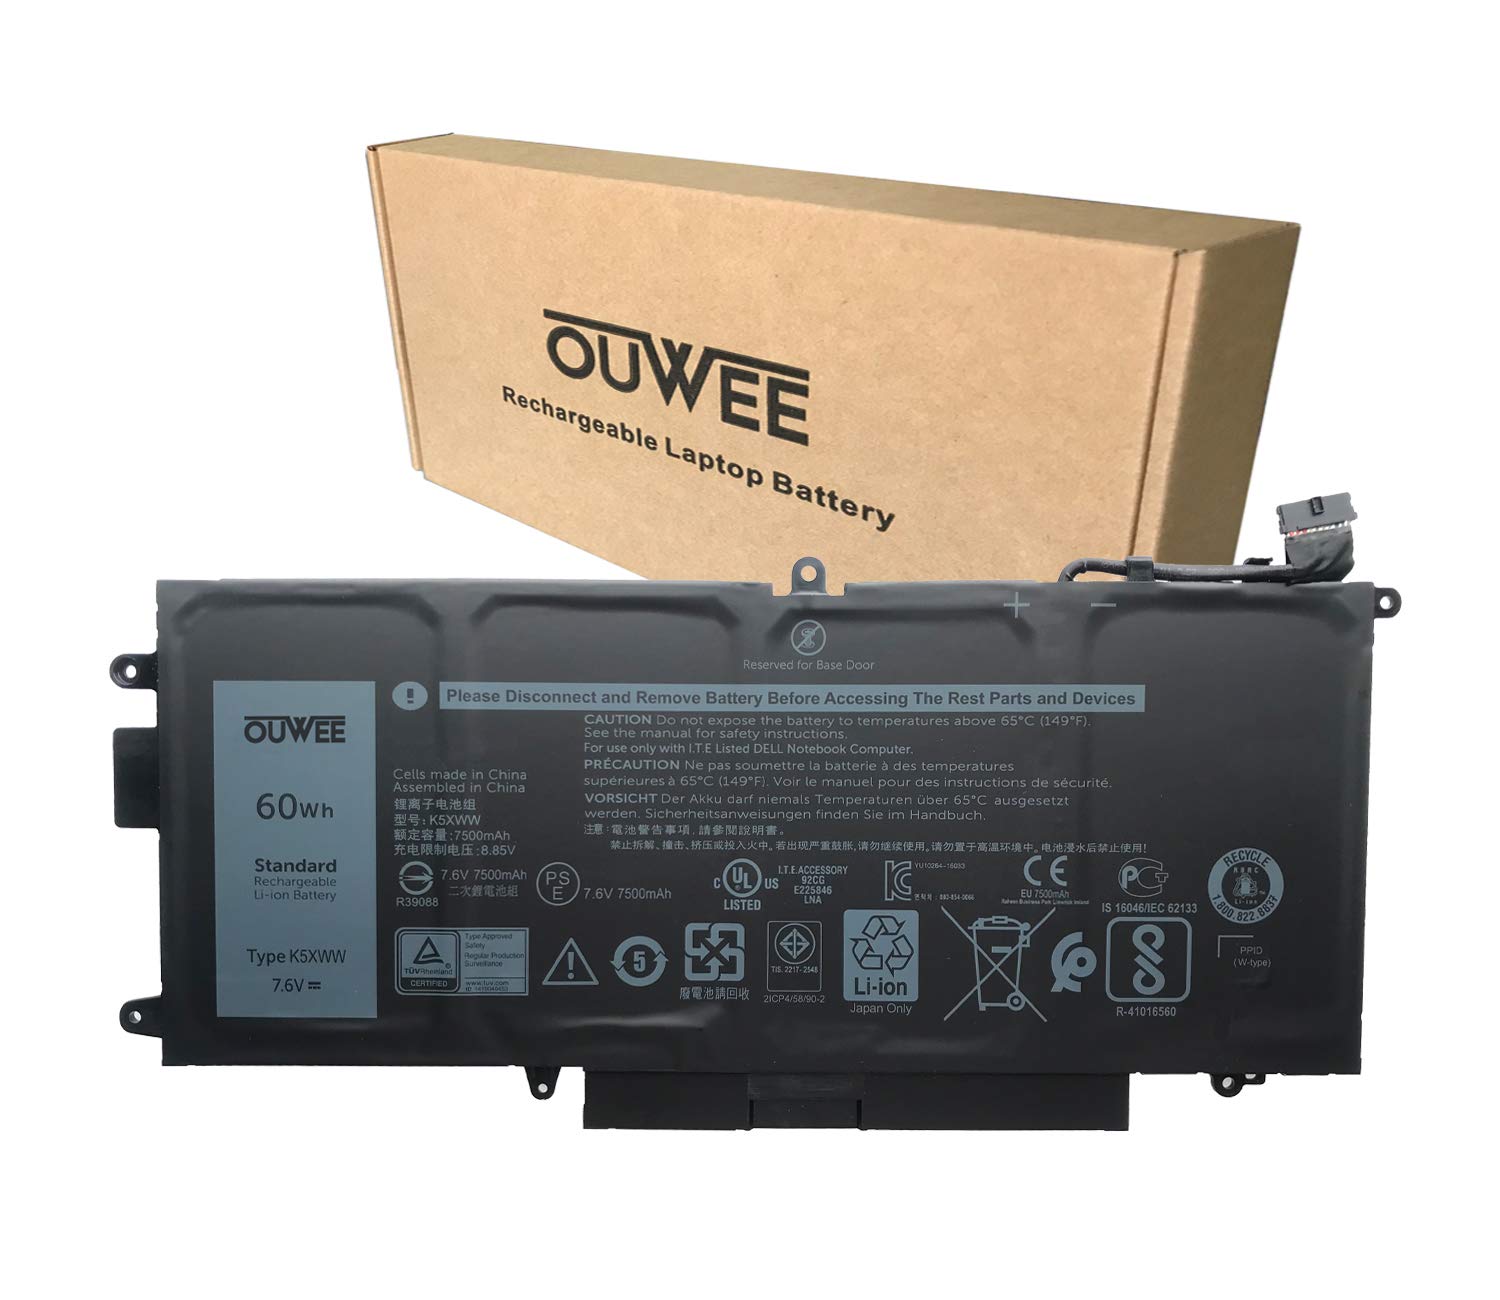 OUWEE K5XWW Laptop Battery Compatible with DELL Latitude 5289 7389 7390 2-in-1 Series Notebook 0K5XWW 71TG4 N18GG 725KY 7.6V 60Wh 7500mAh 4-Cell